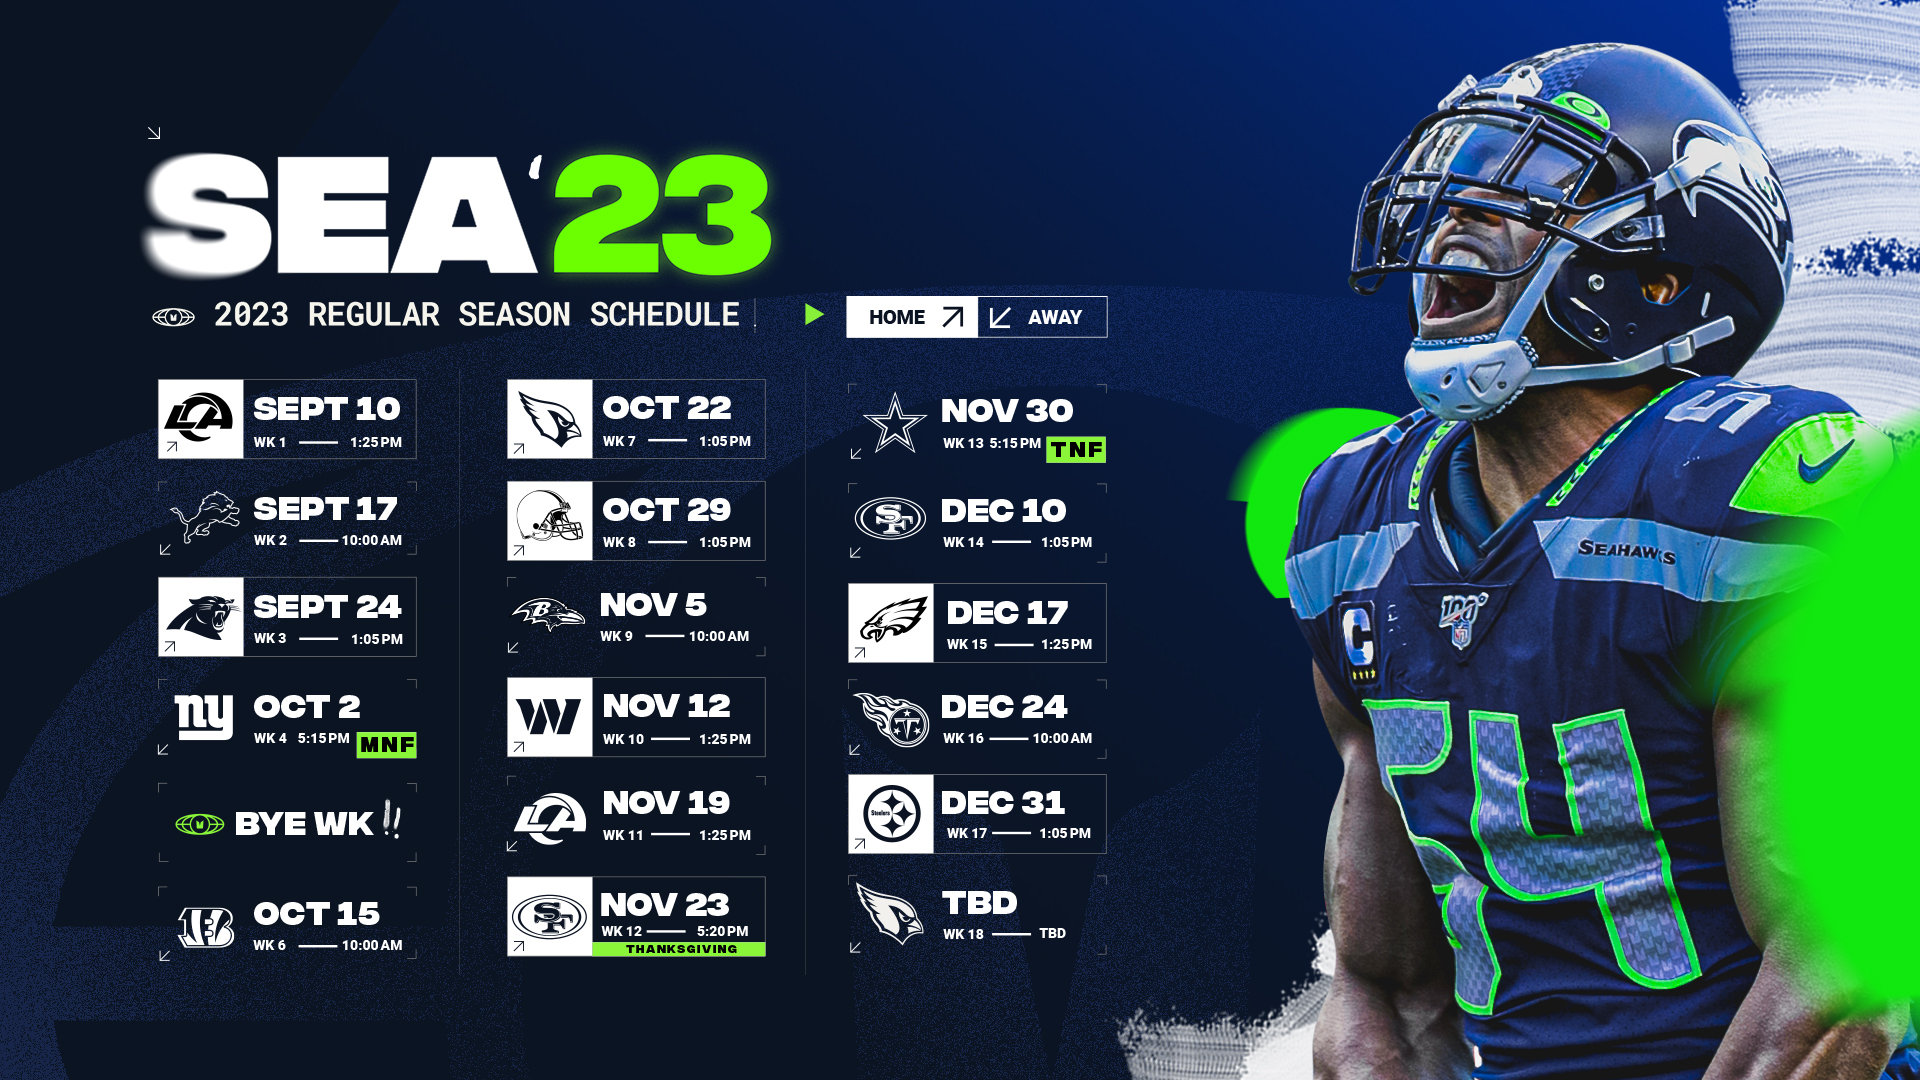 what time do the seahawks play tomorrow and what channel